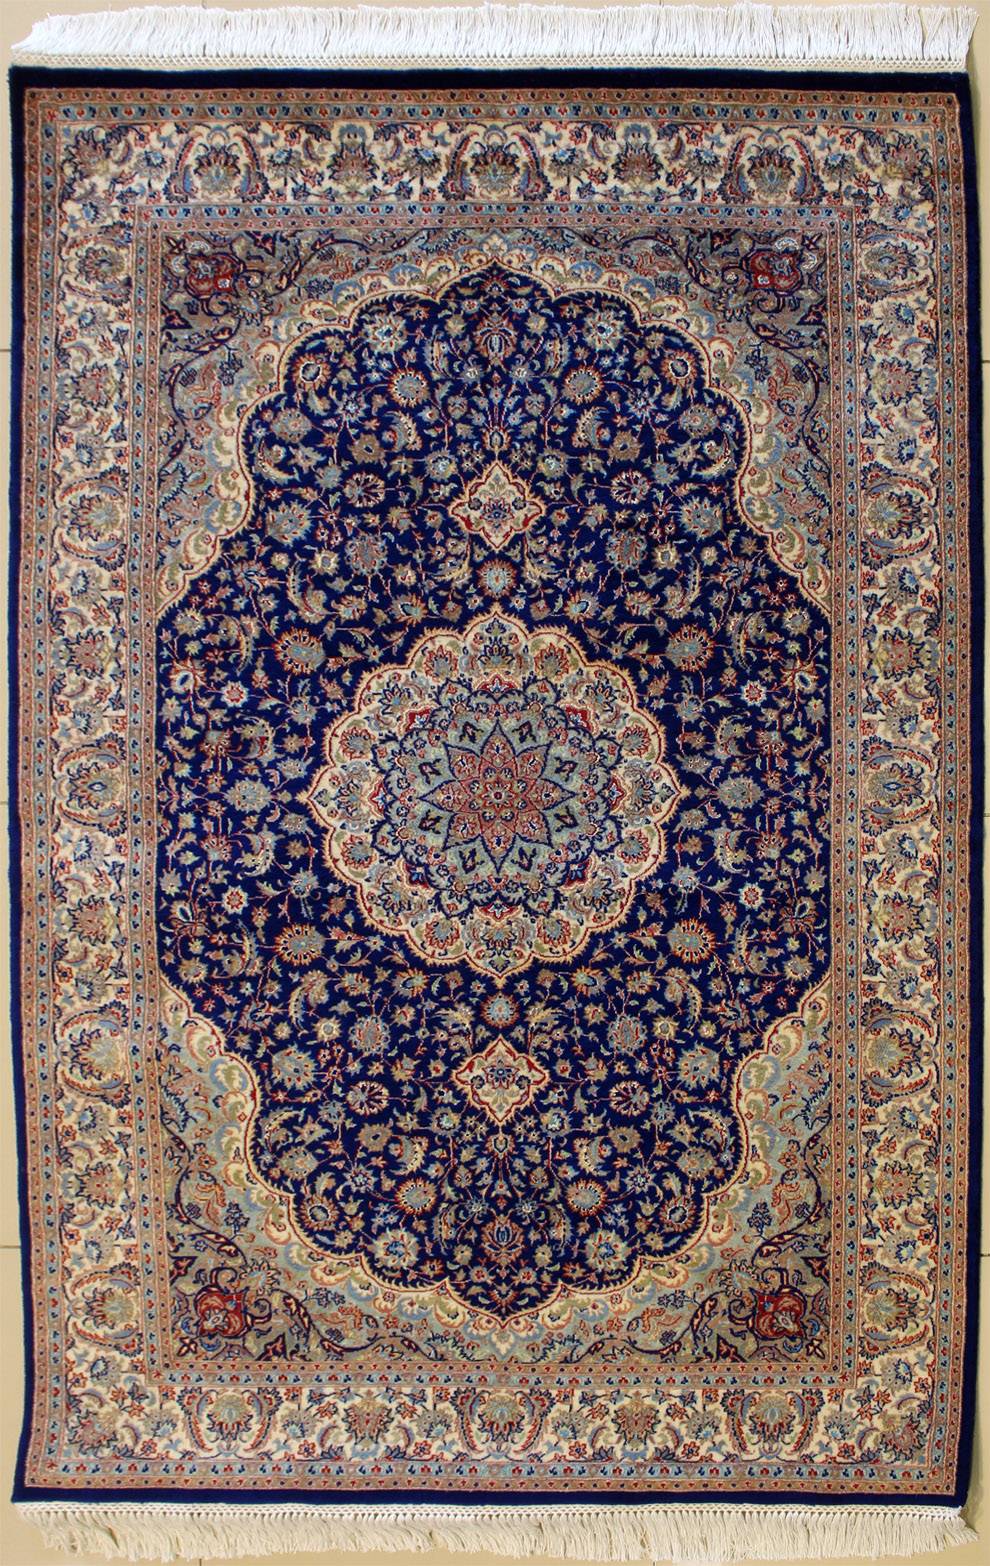 4x6 Rectangular Double Knot Rug 100% Original Hand-Knotted in Greenish Blue,Reddish Brown Floral Design RugsTC 4'0 x 6'1 Pak Persian Area Rug with Silk & Wool Pile 